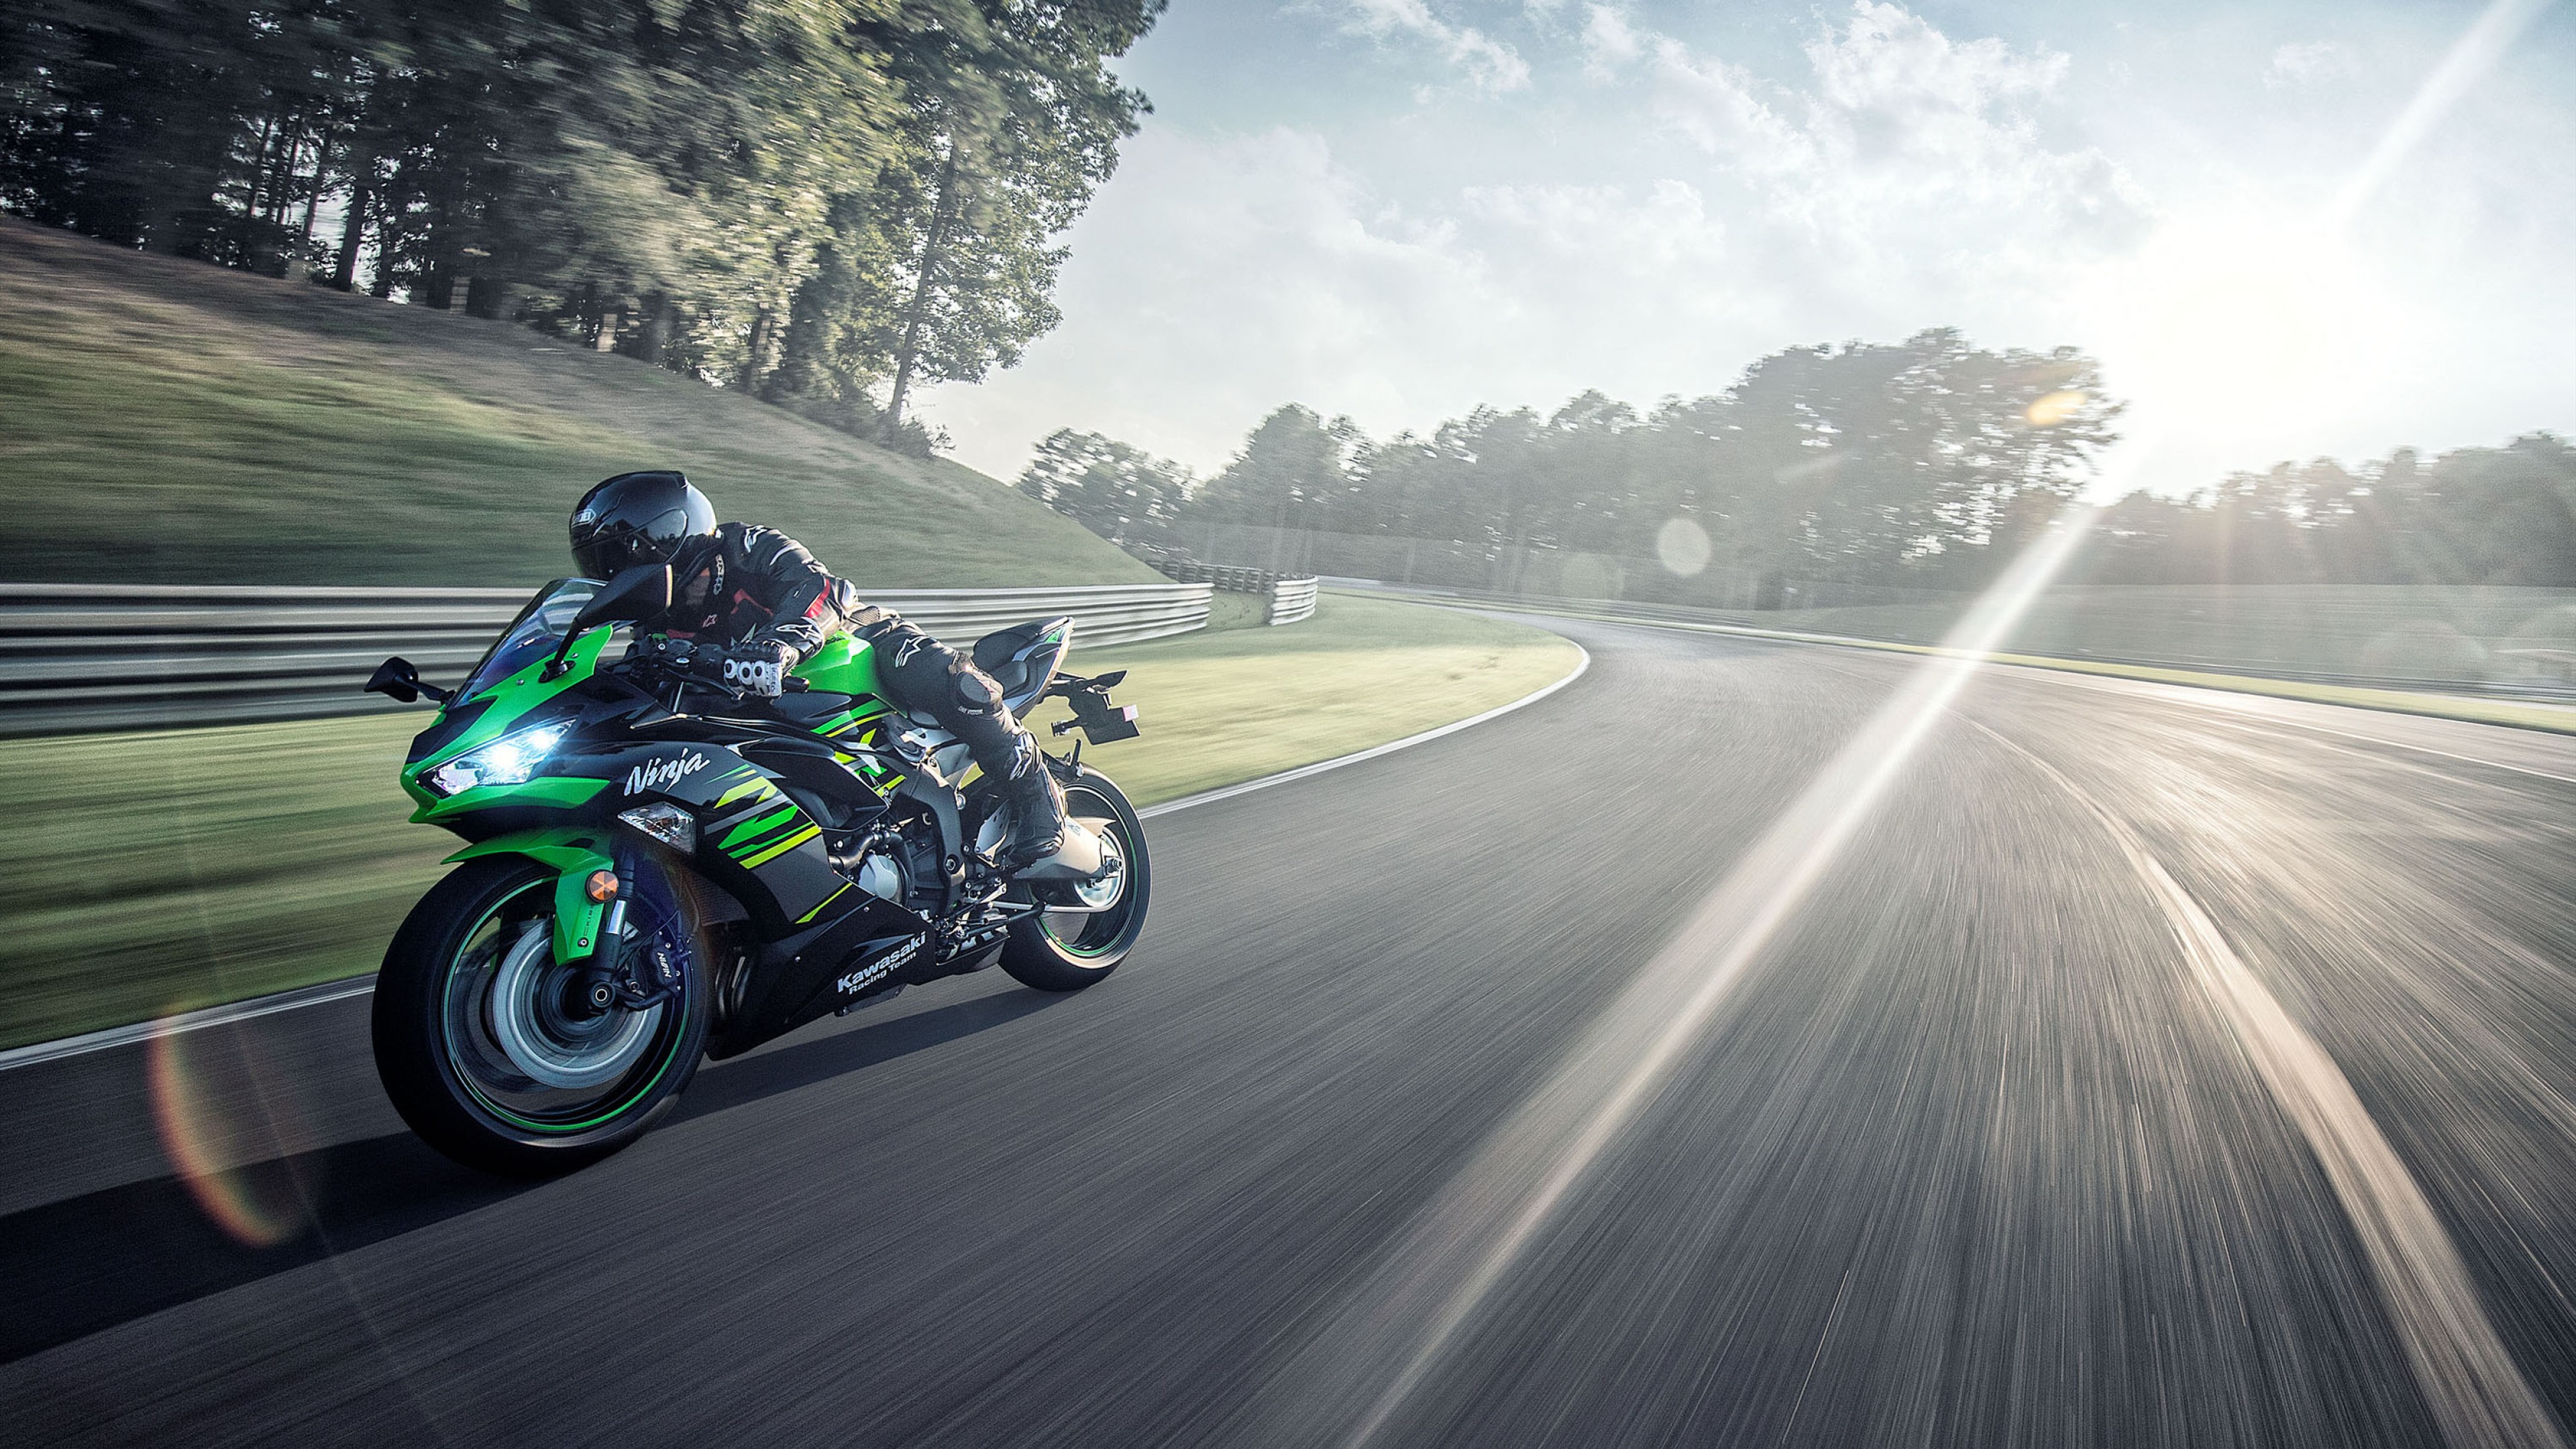 Zx6R Wallpapers